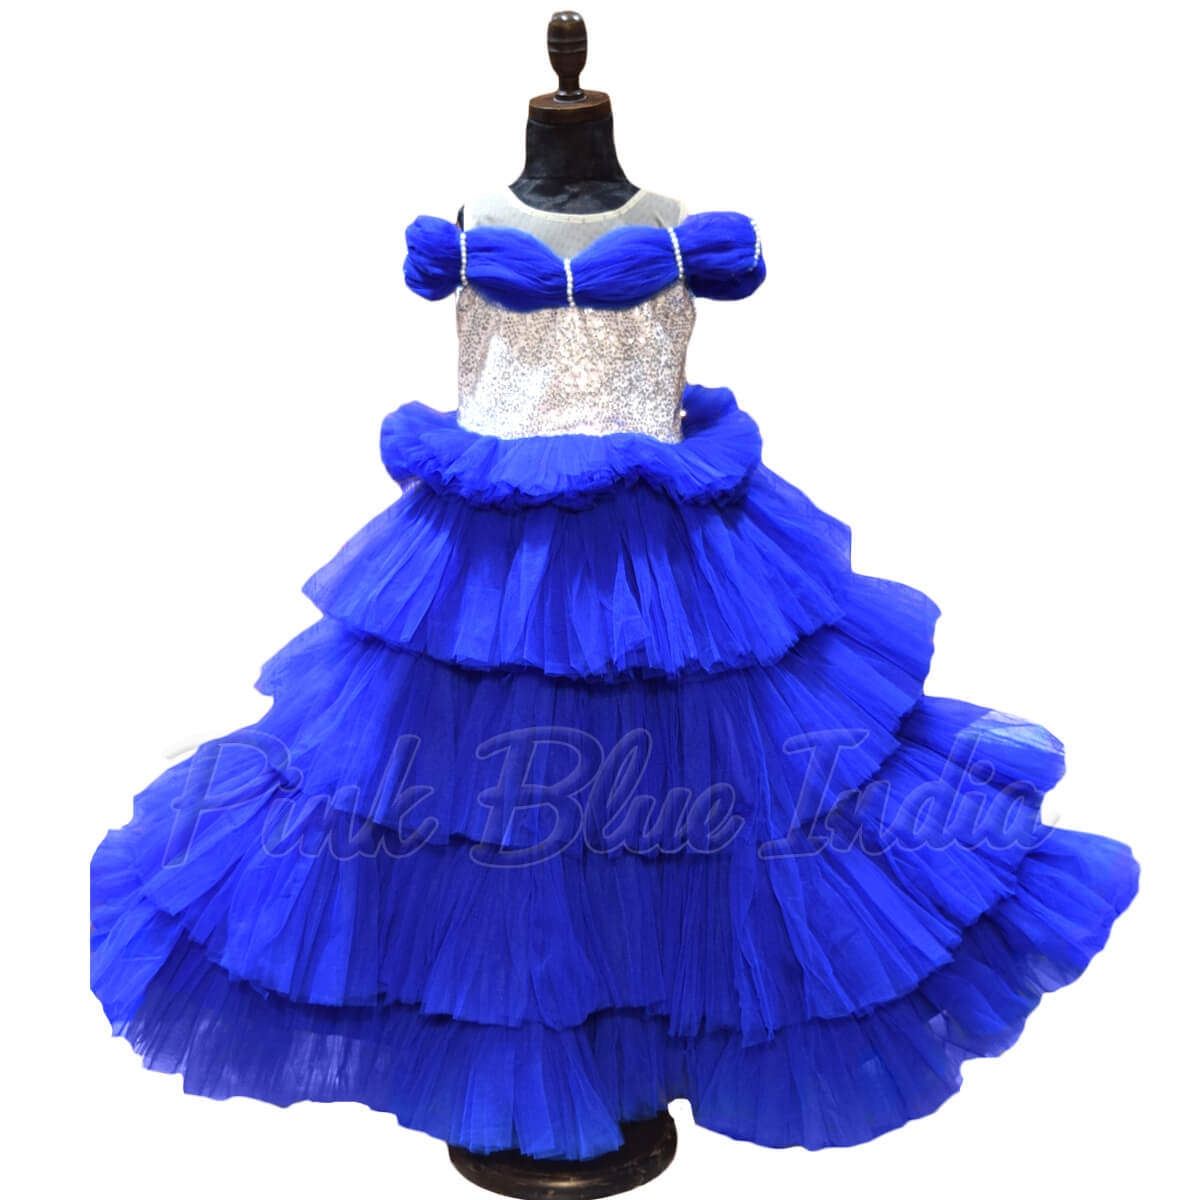 Royal Blue Party Gown for Toddlers and Girls Birthday, Wedding party